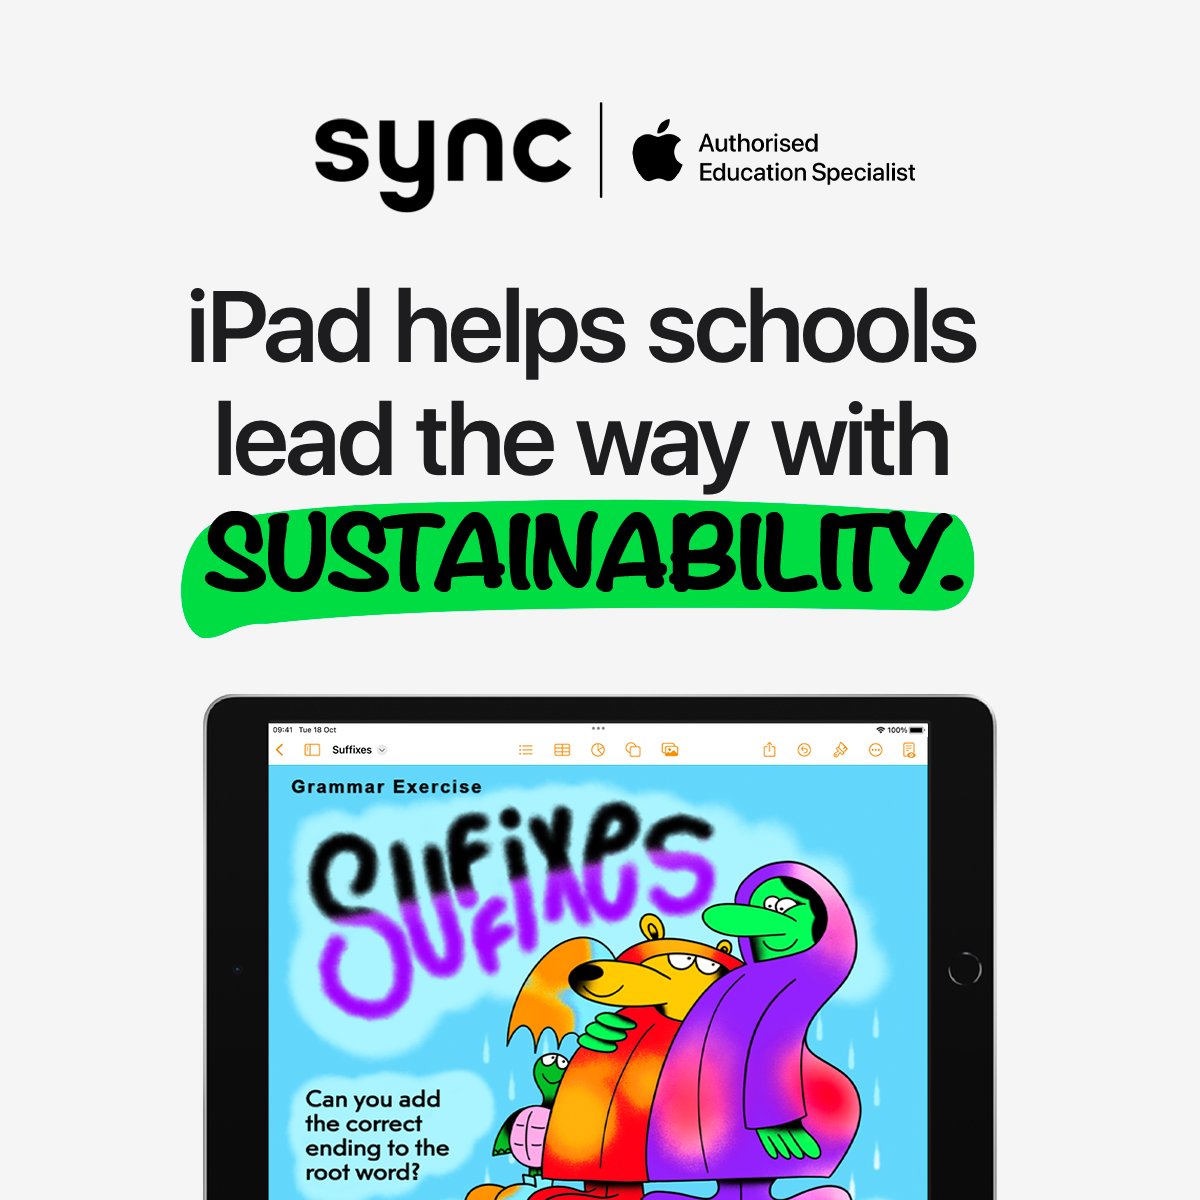 iPad is designed with students and the planet in mind. Built with recycled materials.¹ Energy efficient. Sustainably packaged.² iPad helps schools lead the way with sustainability. Help improve your school’s energy efficiency with the environmentally responsible design of iPad.